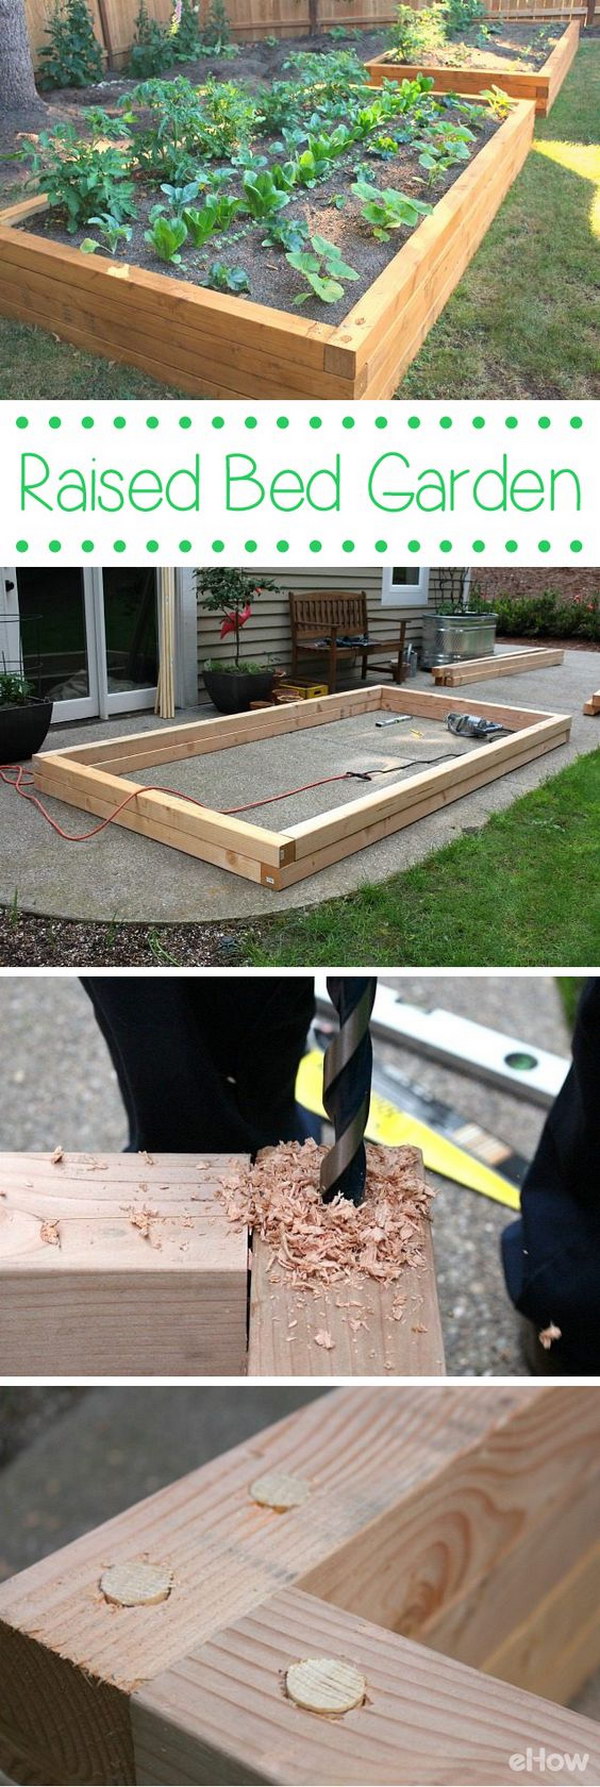 How to Build a Raised Bed Garden. 